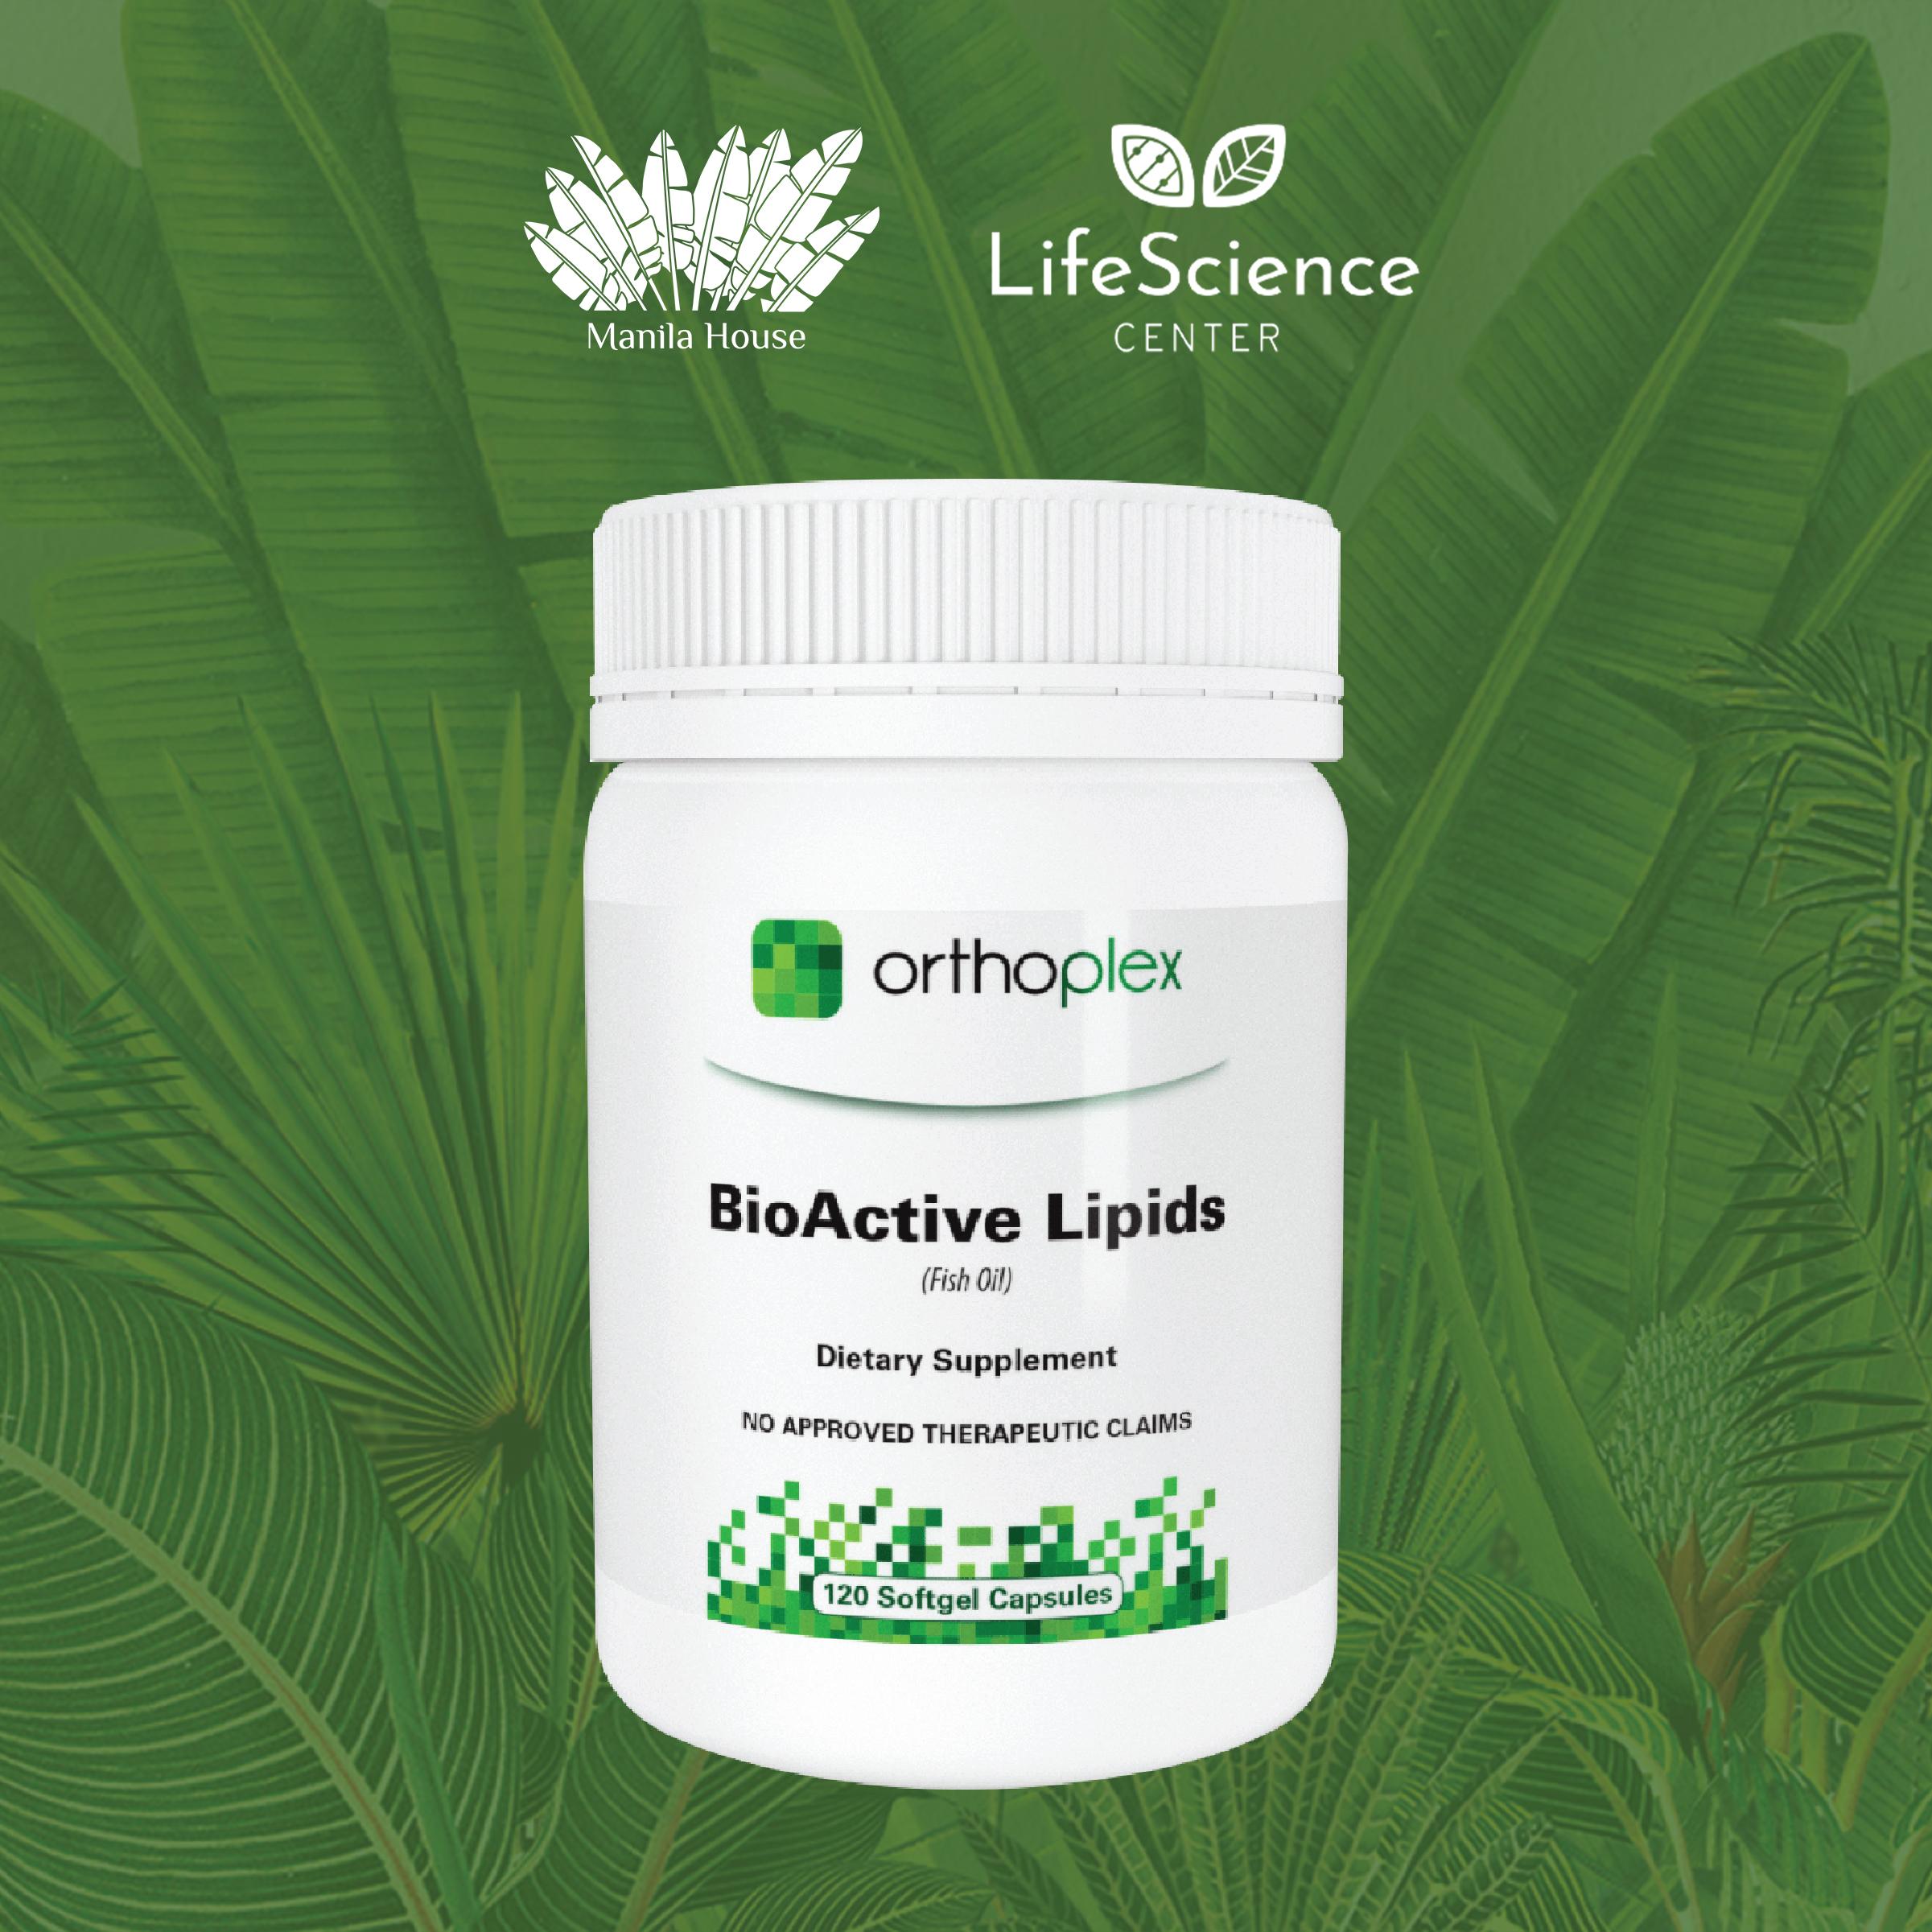 BioConcepts Orthoplex BioActive Lipids for Sale from the Retail Shop of Manila House Private Club Inc